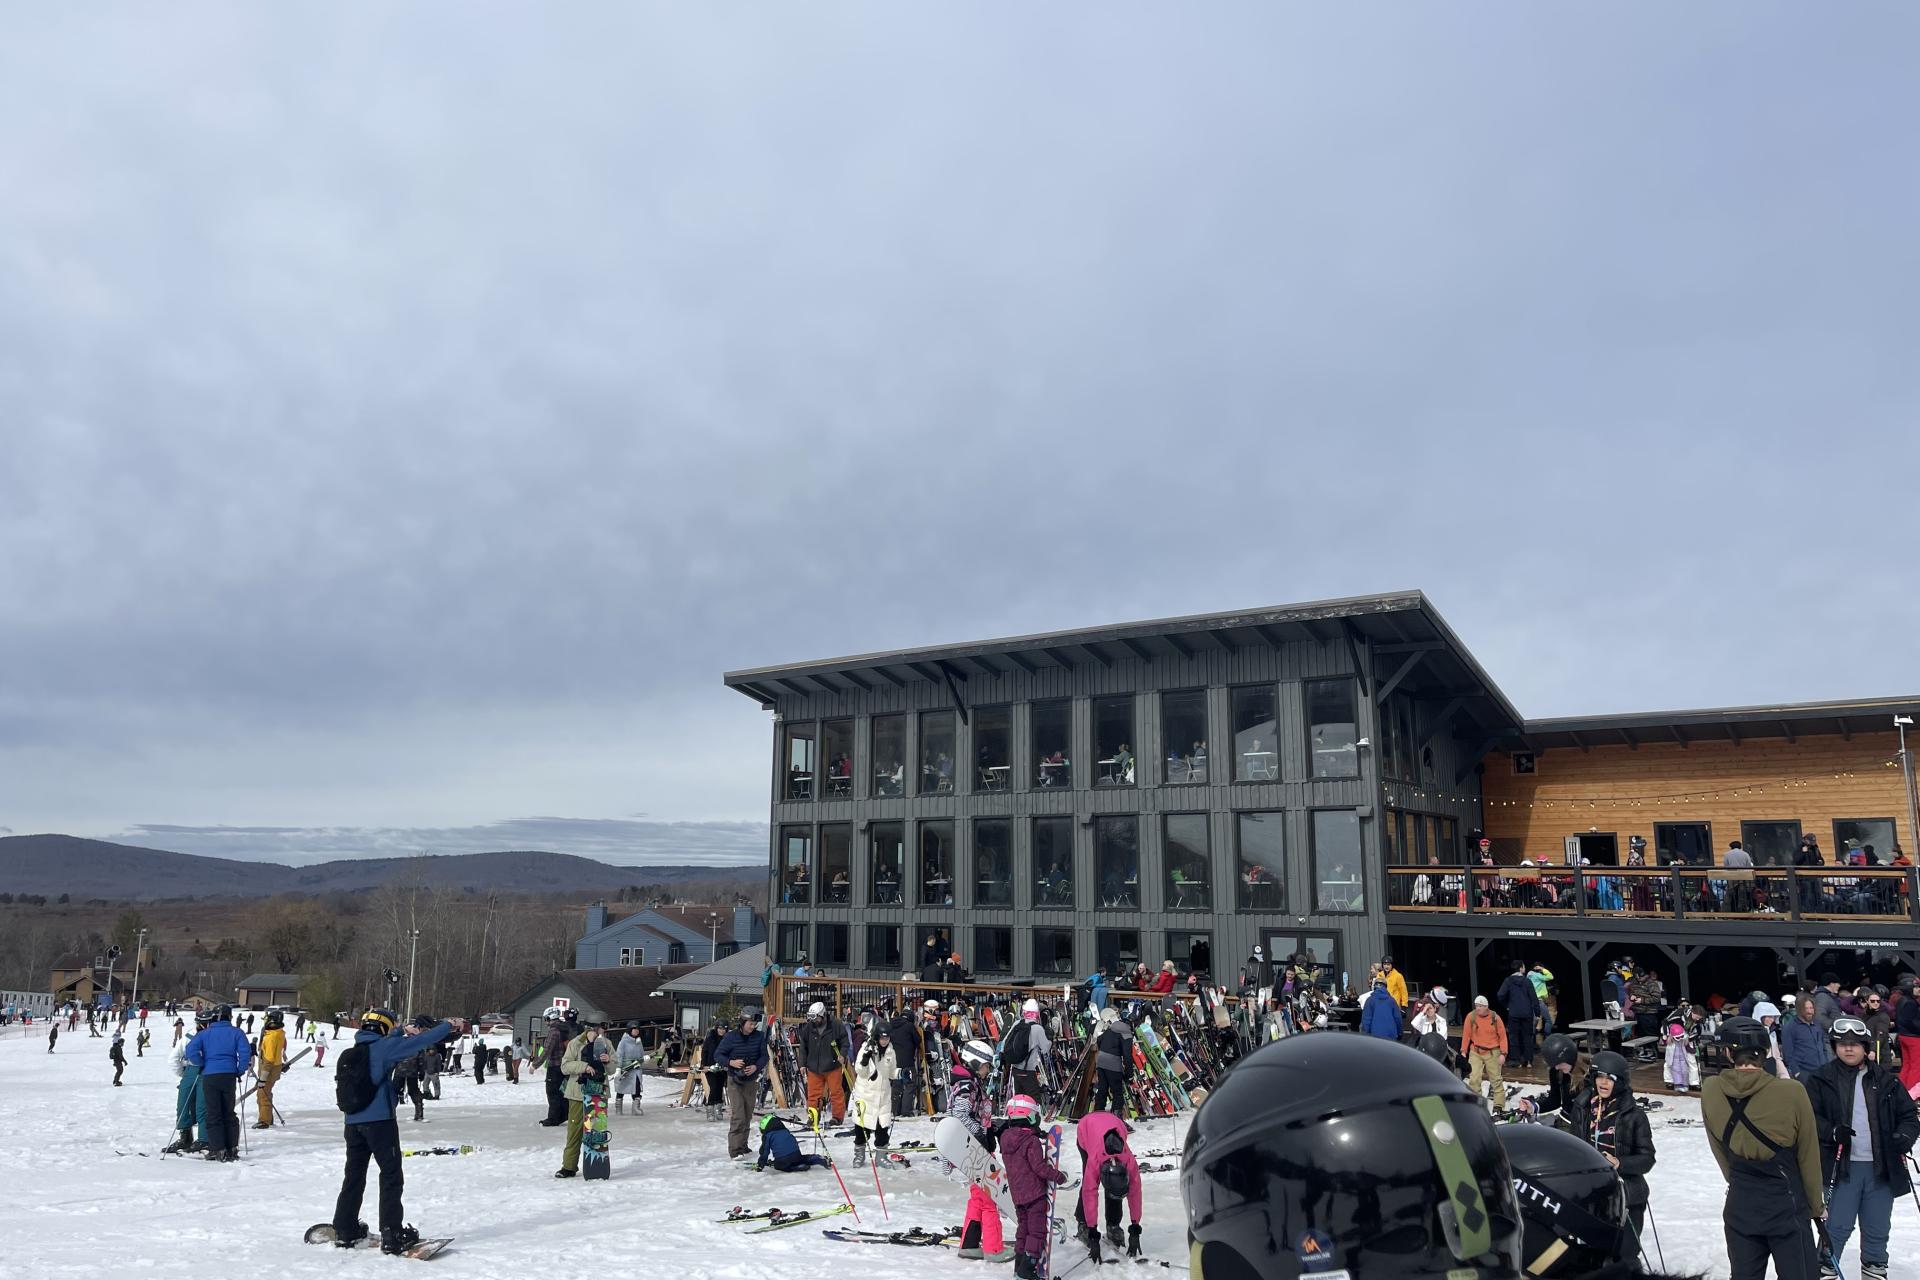  The View of Timberline Mountain Lodge from one of their slopes in Davis, W.Va. (Source: Autumn Coleman)